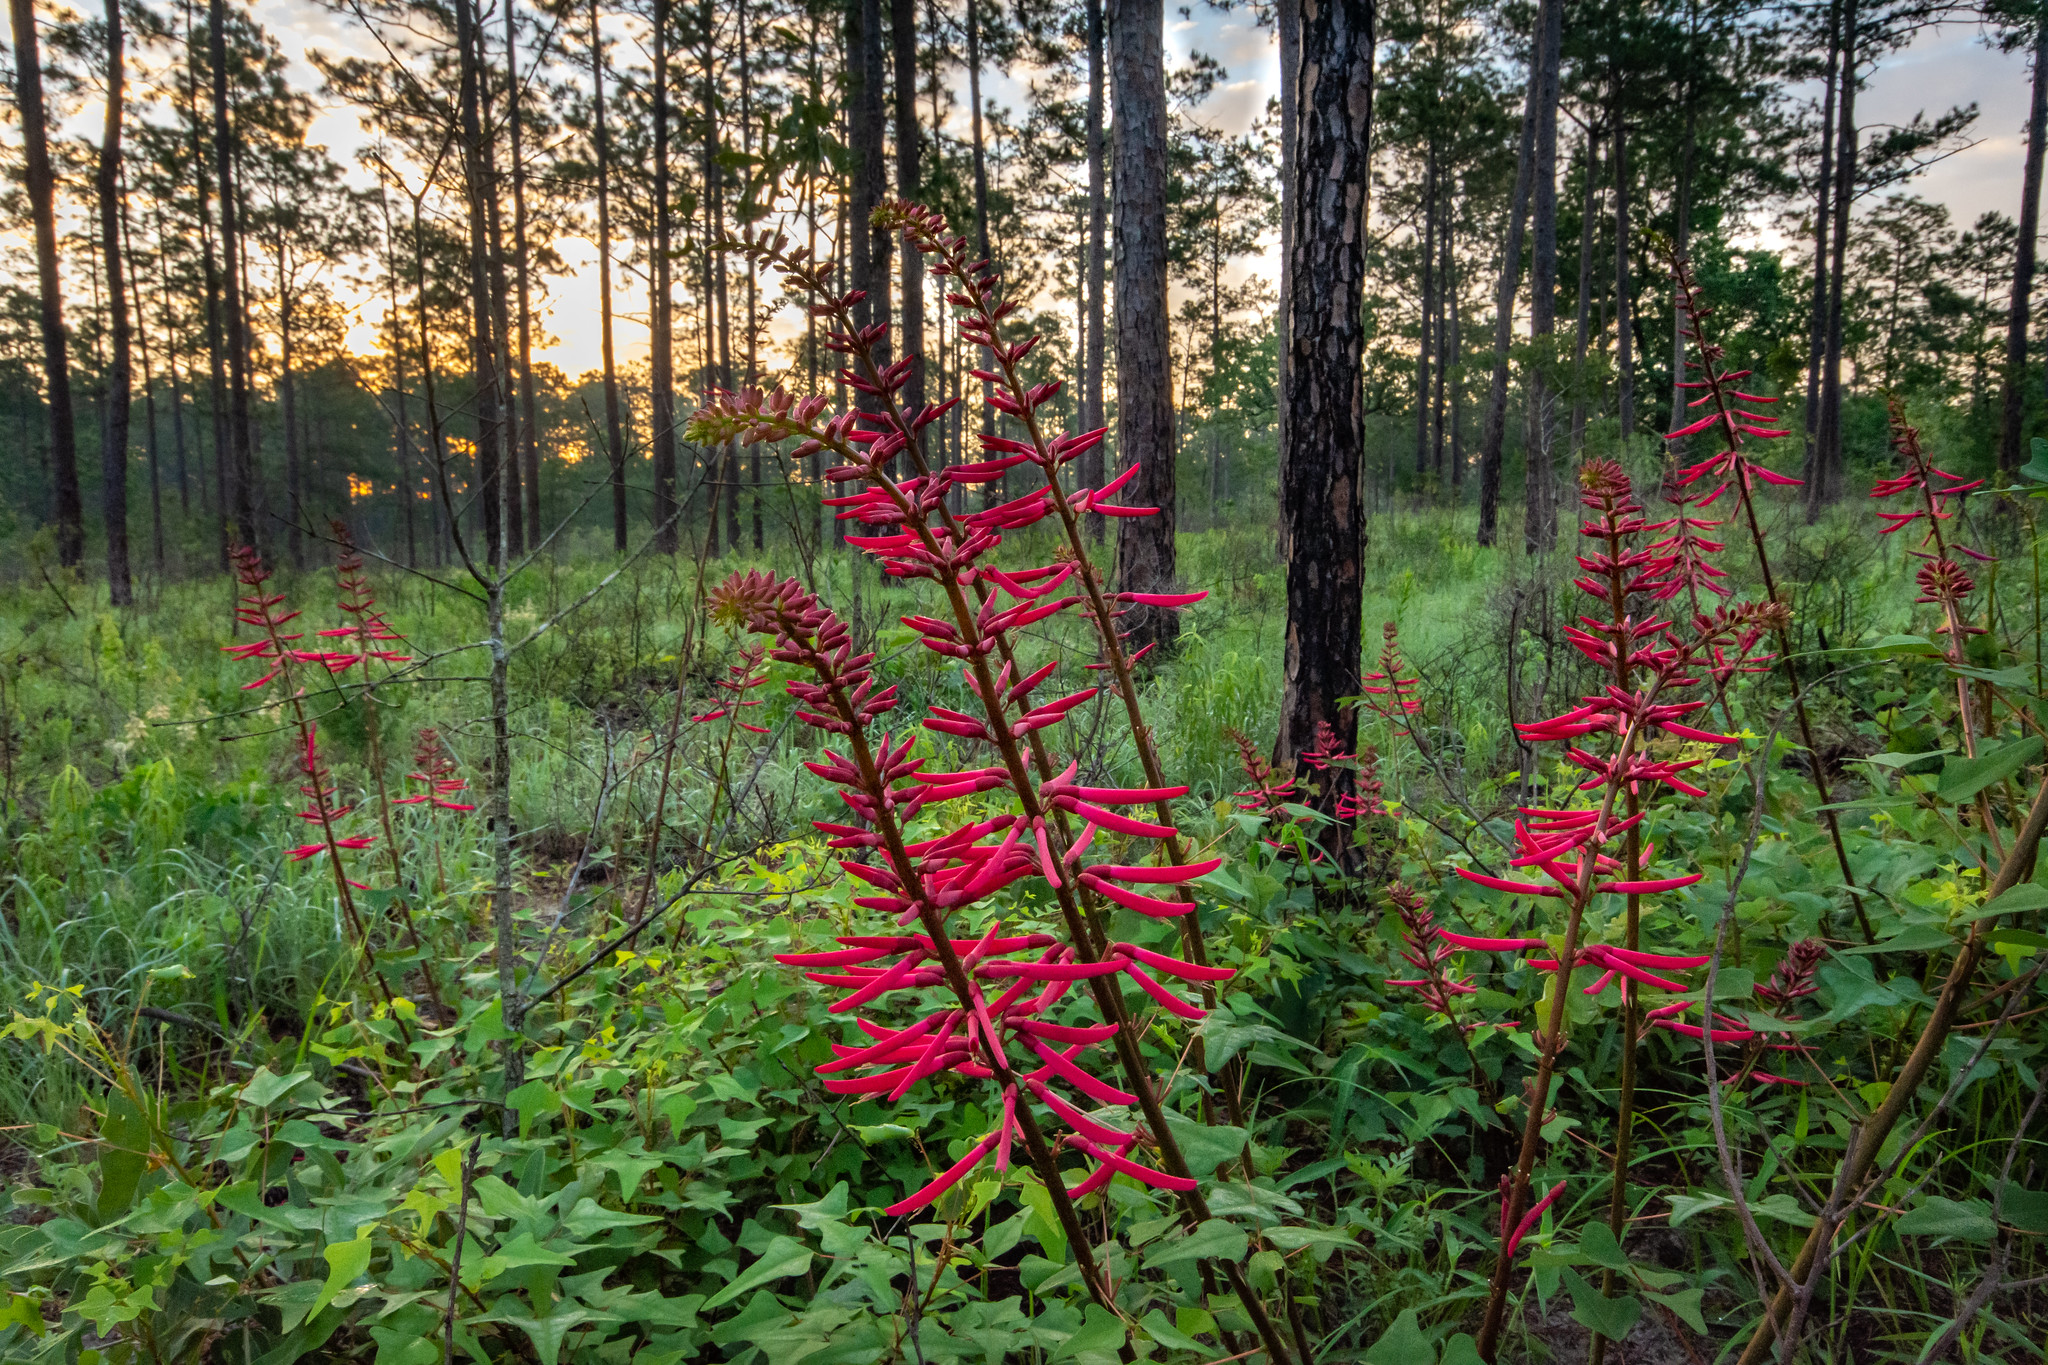 Red flowers grow from the lush forest floor.